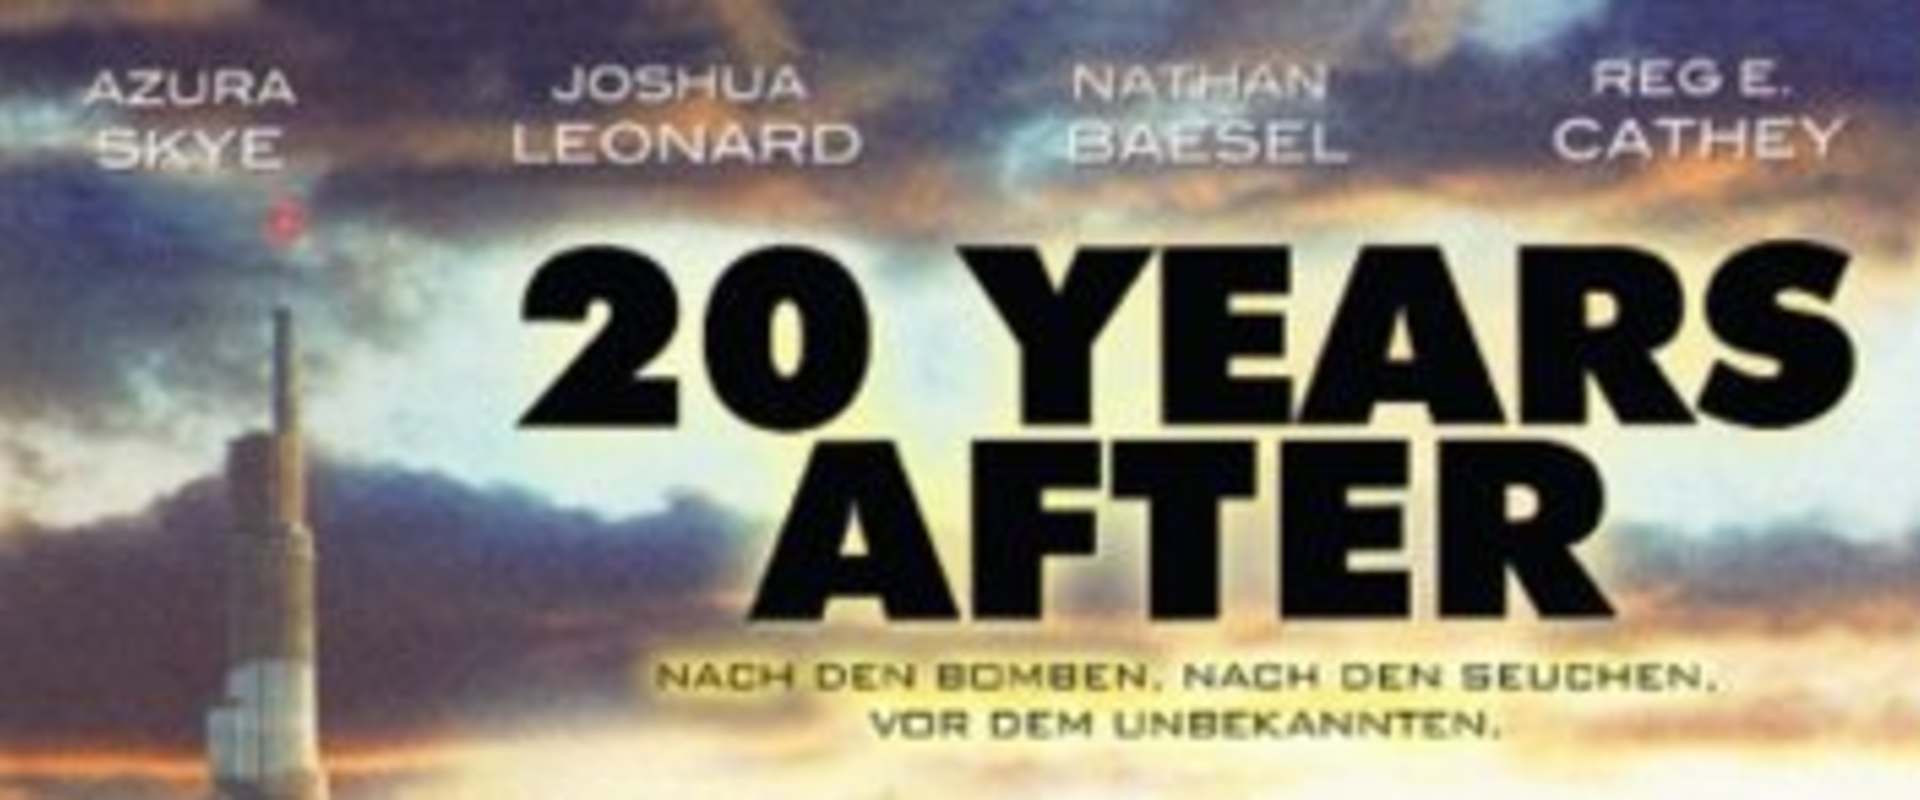 20 Years After background 1